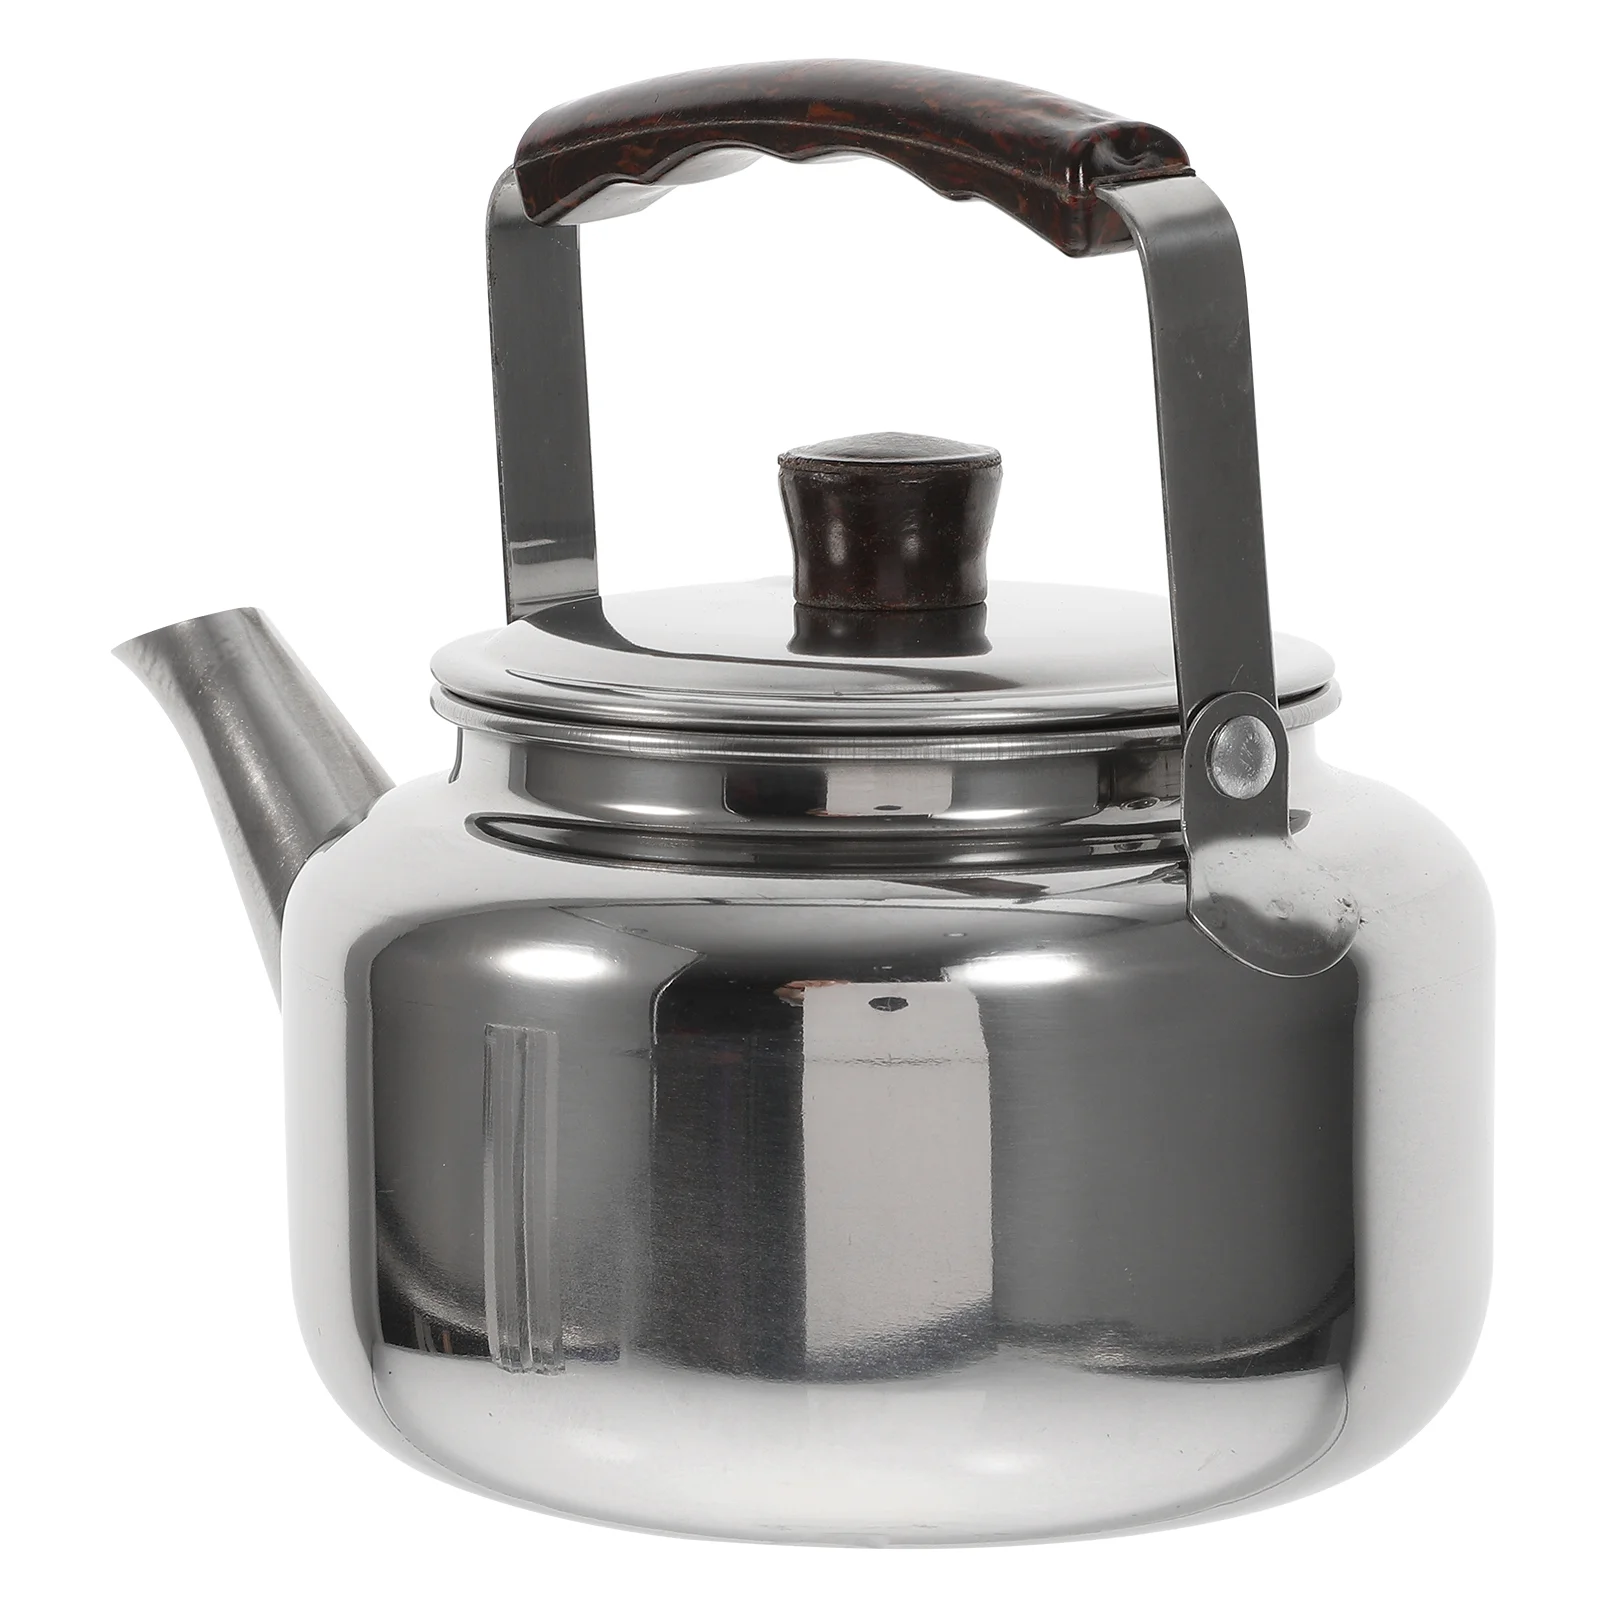 

Kettle Tea Water Stovetop Stainless Whistling Steel Teapot Pot Stove Boiling Boiler Hot Camping Induction Gas Loud Whistle